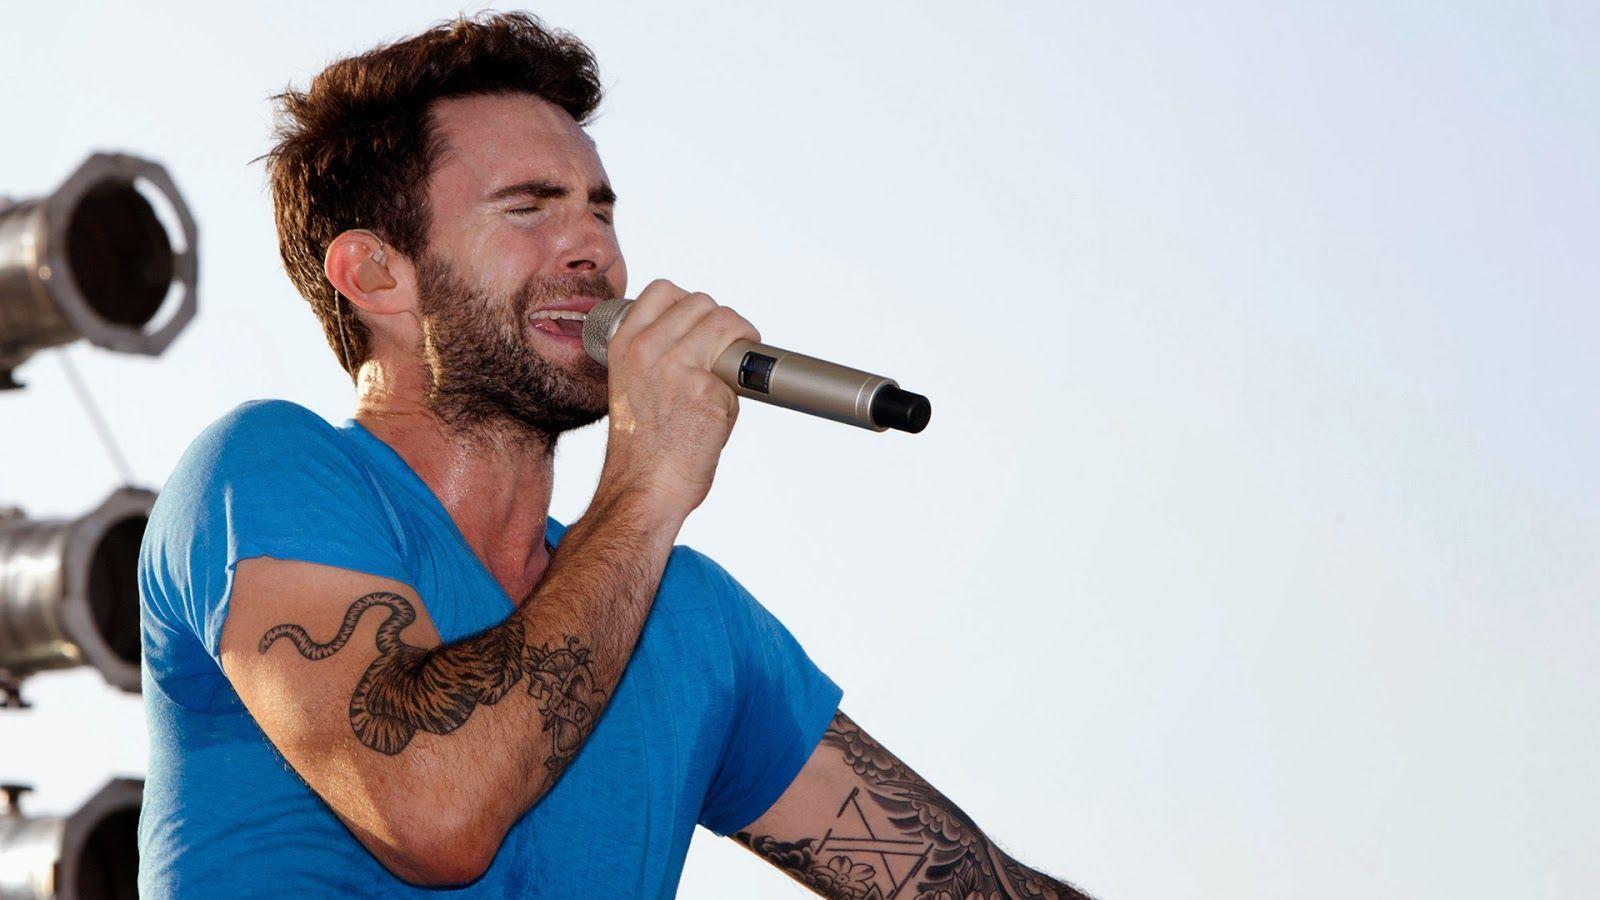 Adam Levine Stylish Stage Performance Image collections